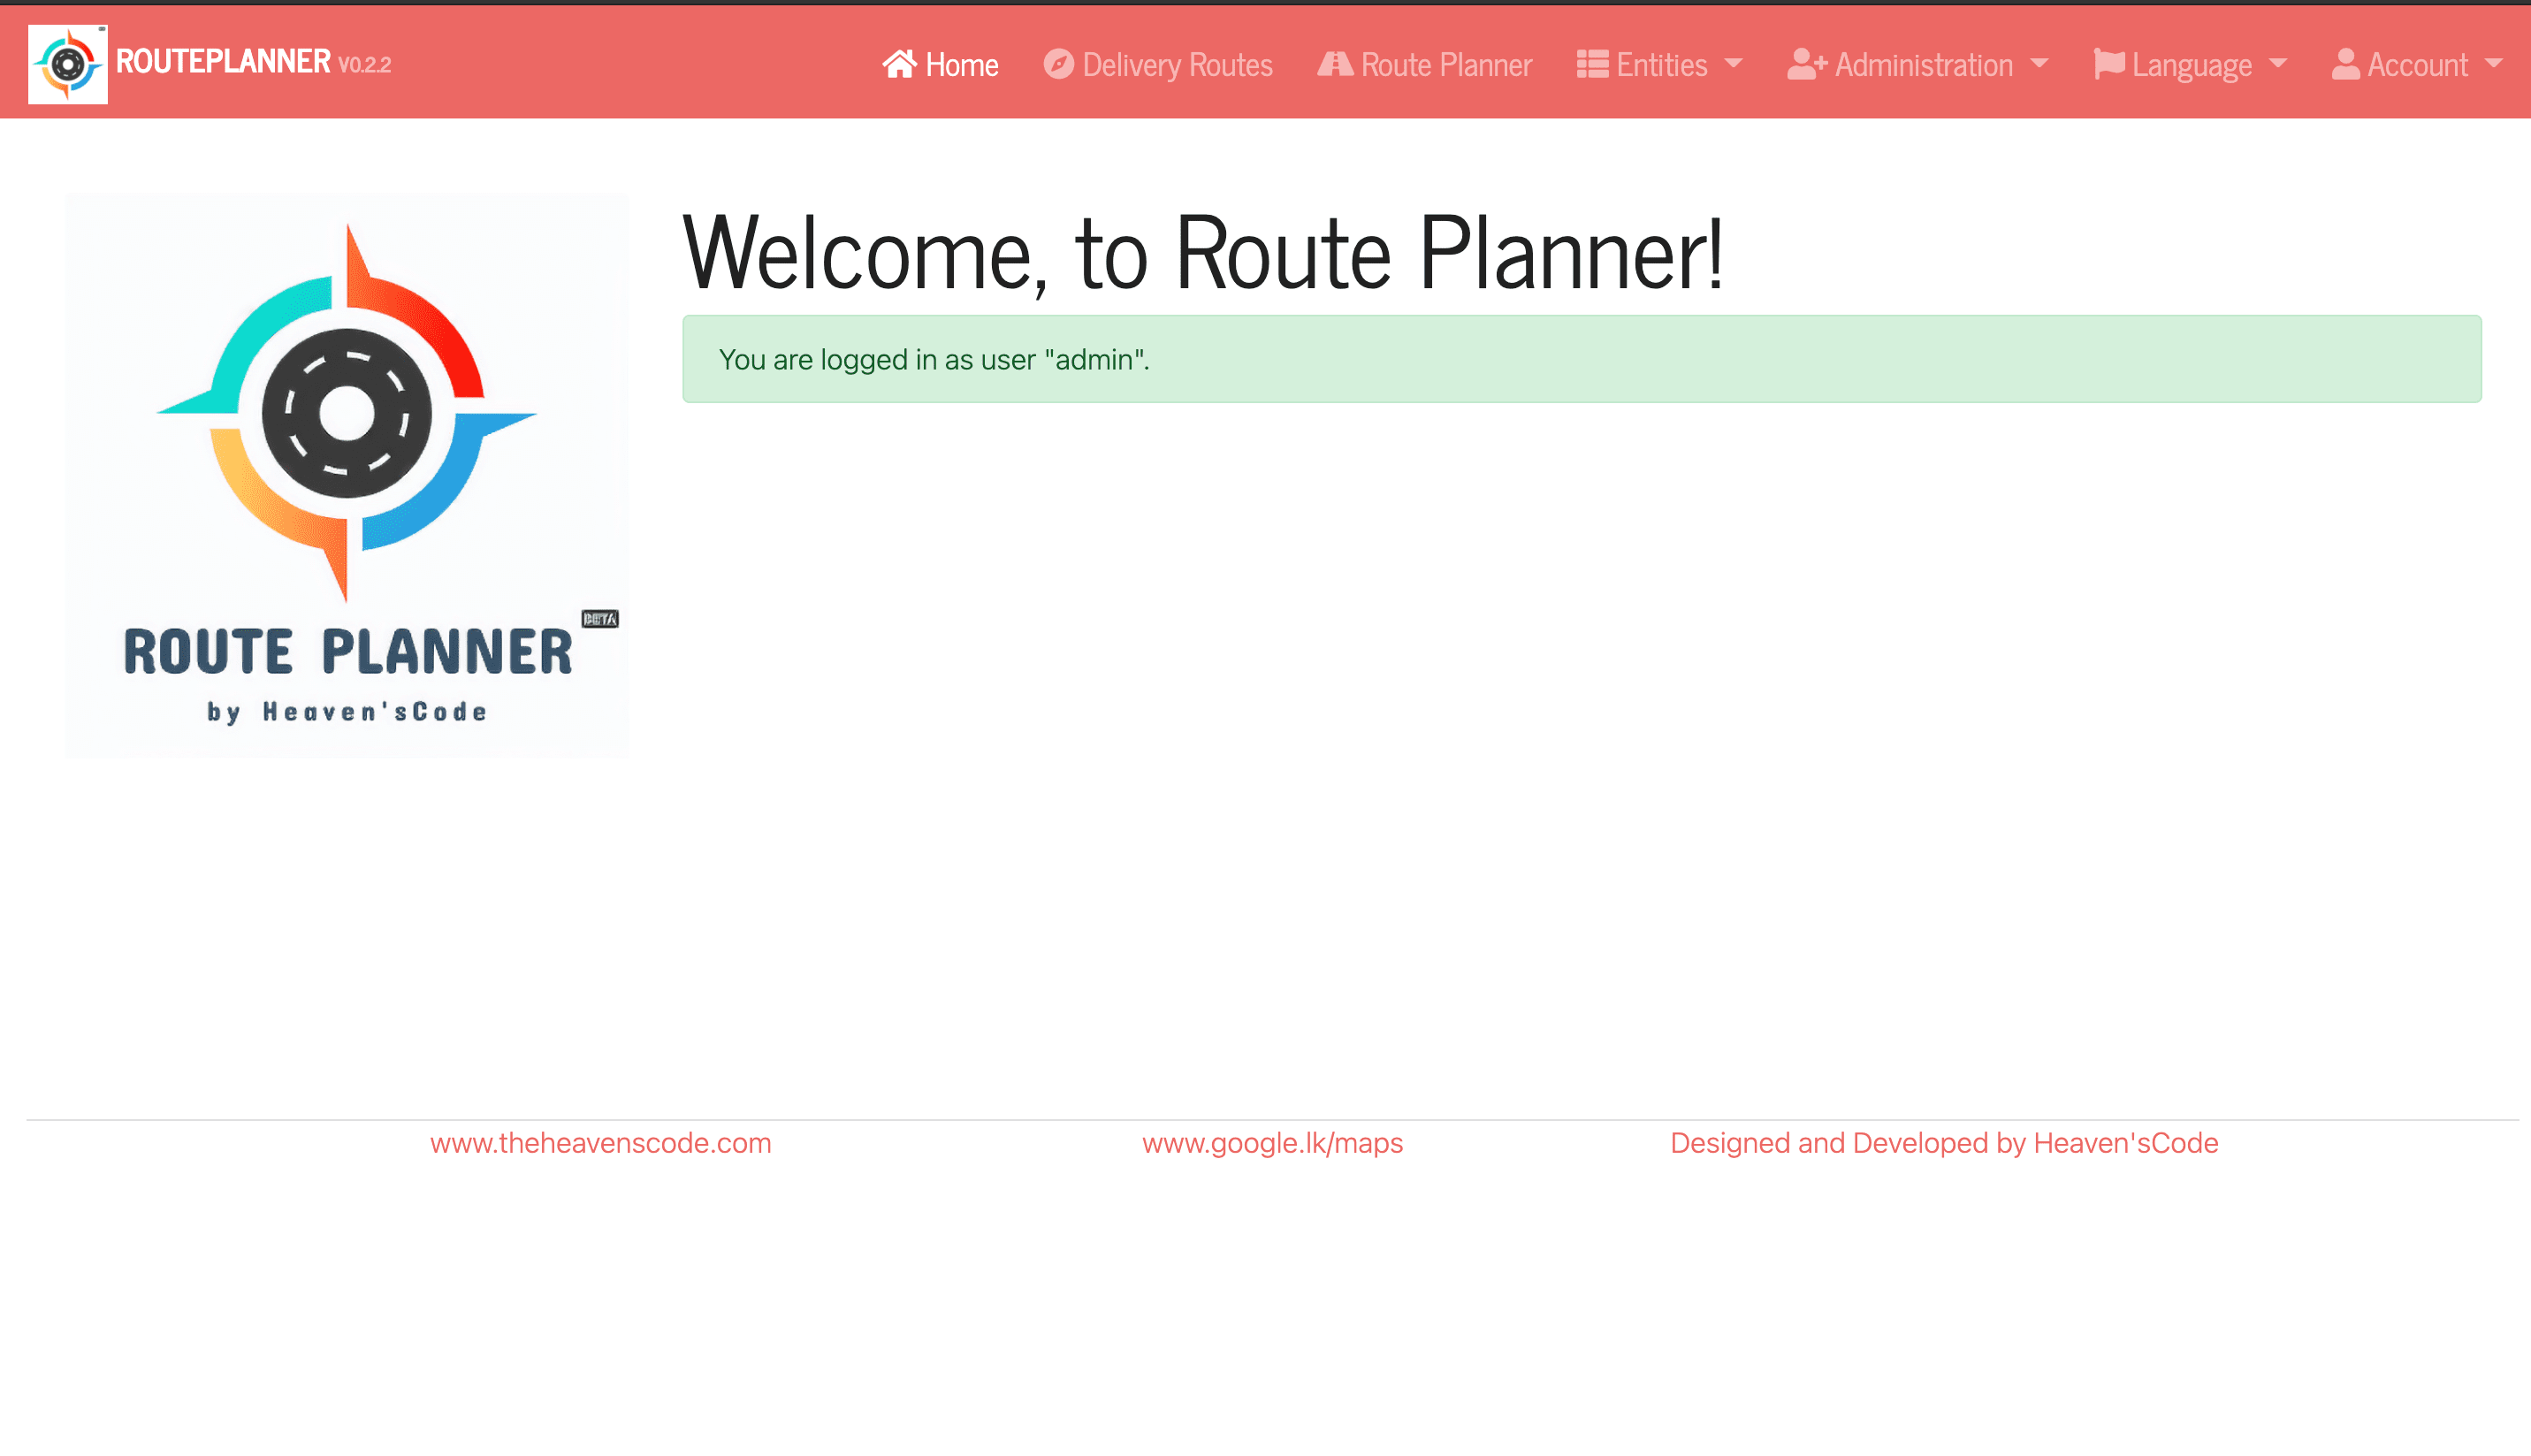 Route Planner System